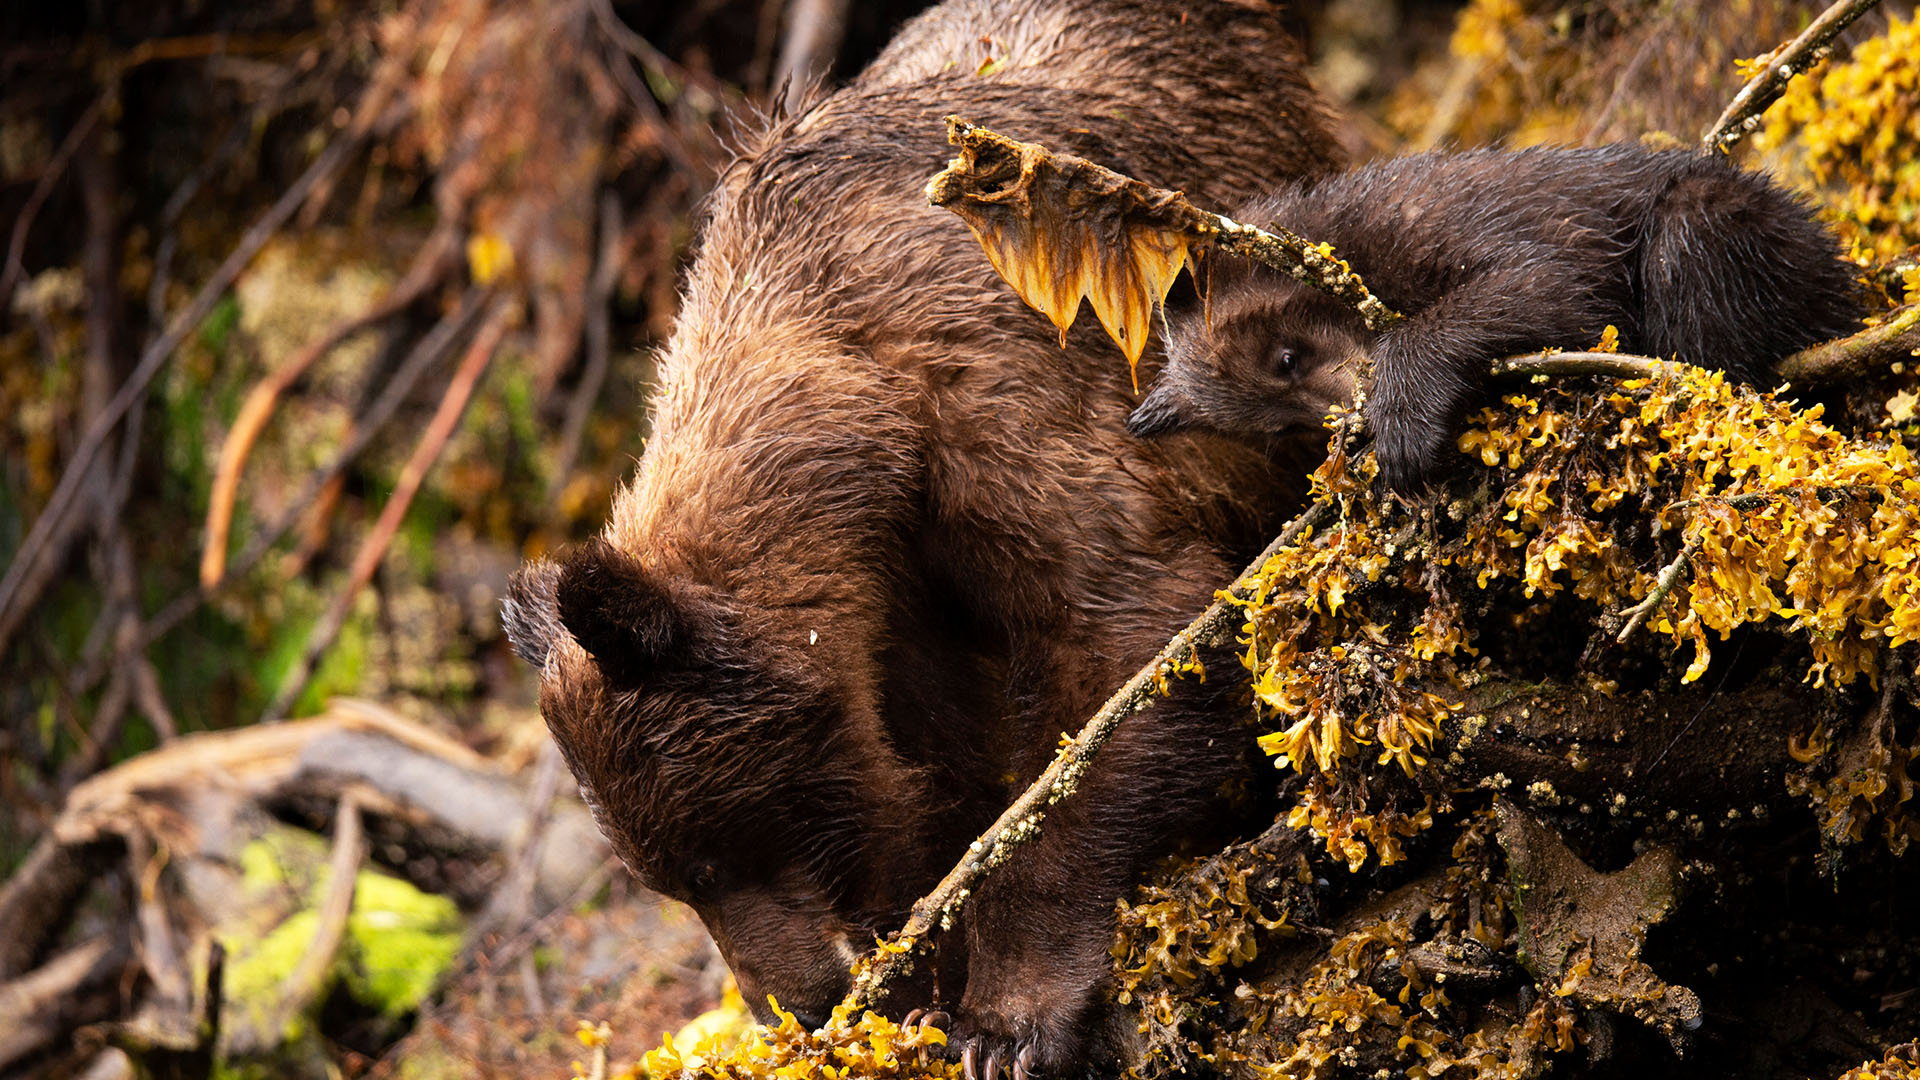 Fern with cub Joey eating seaweed from tree bark. This is from Growing Up Animal. [Photo of the day - January 2024]